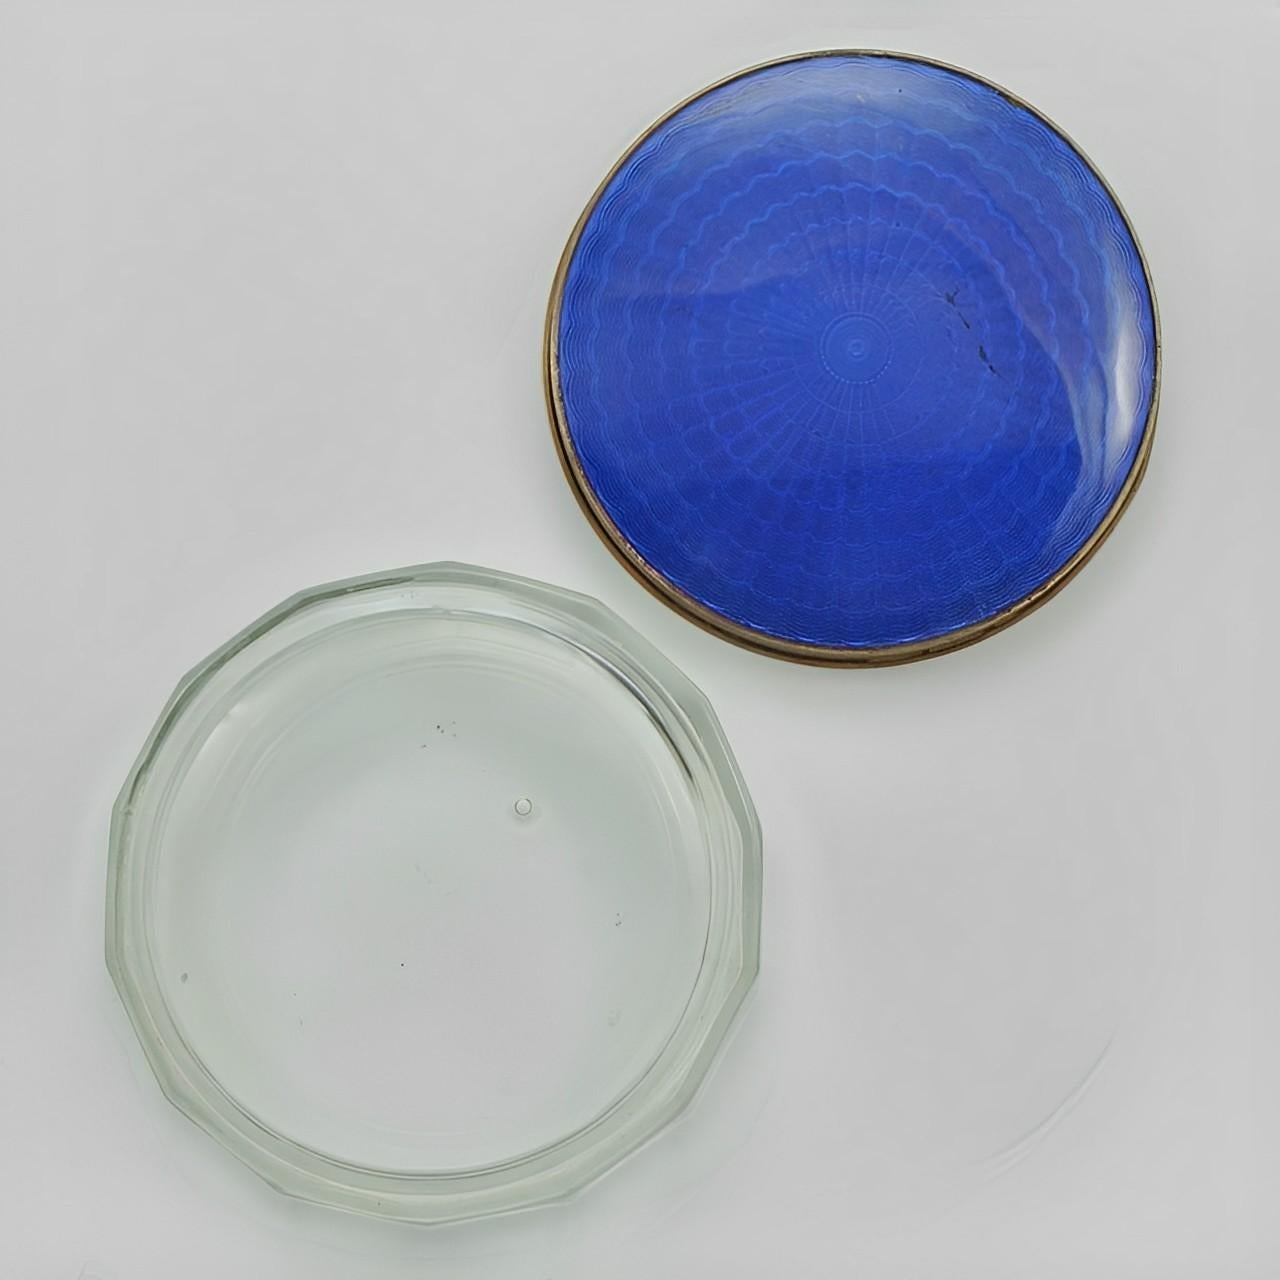 Beautiful silver plated electric blue guilloche enamel glass jar. The lid measures diameter 8.6 cm / 3.38 inches and the base is diameter 9.1 cm / 3.58 inches. Height is 3cm / 1.18 inches. There is a chip to the bottom of the glass, and a very small